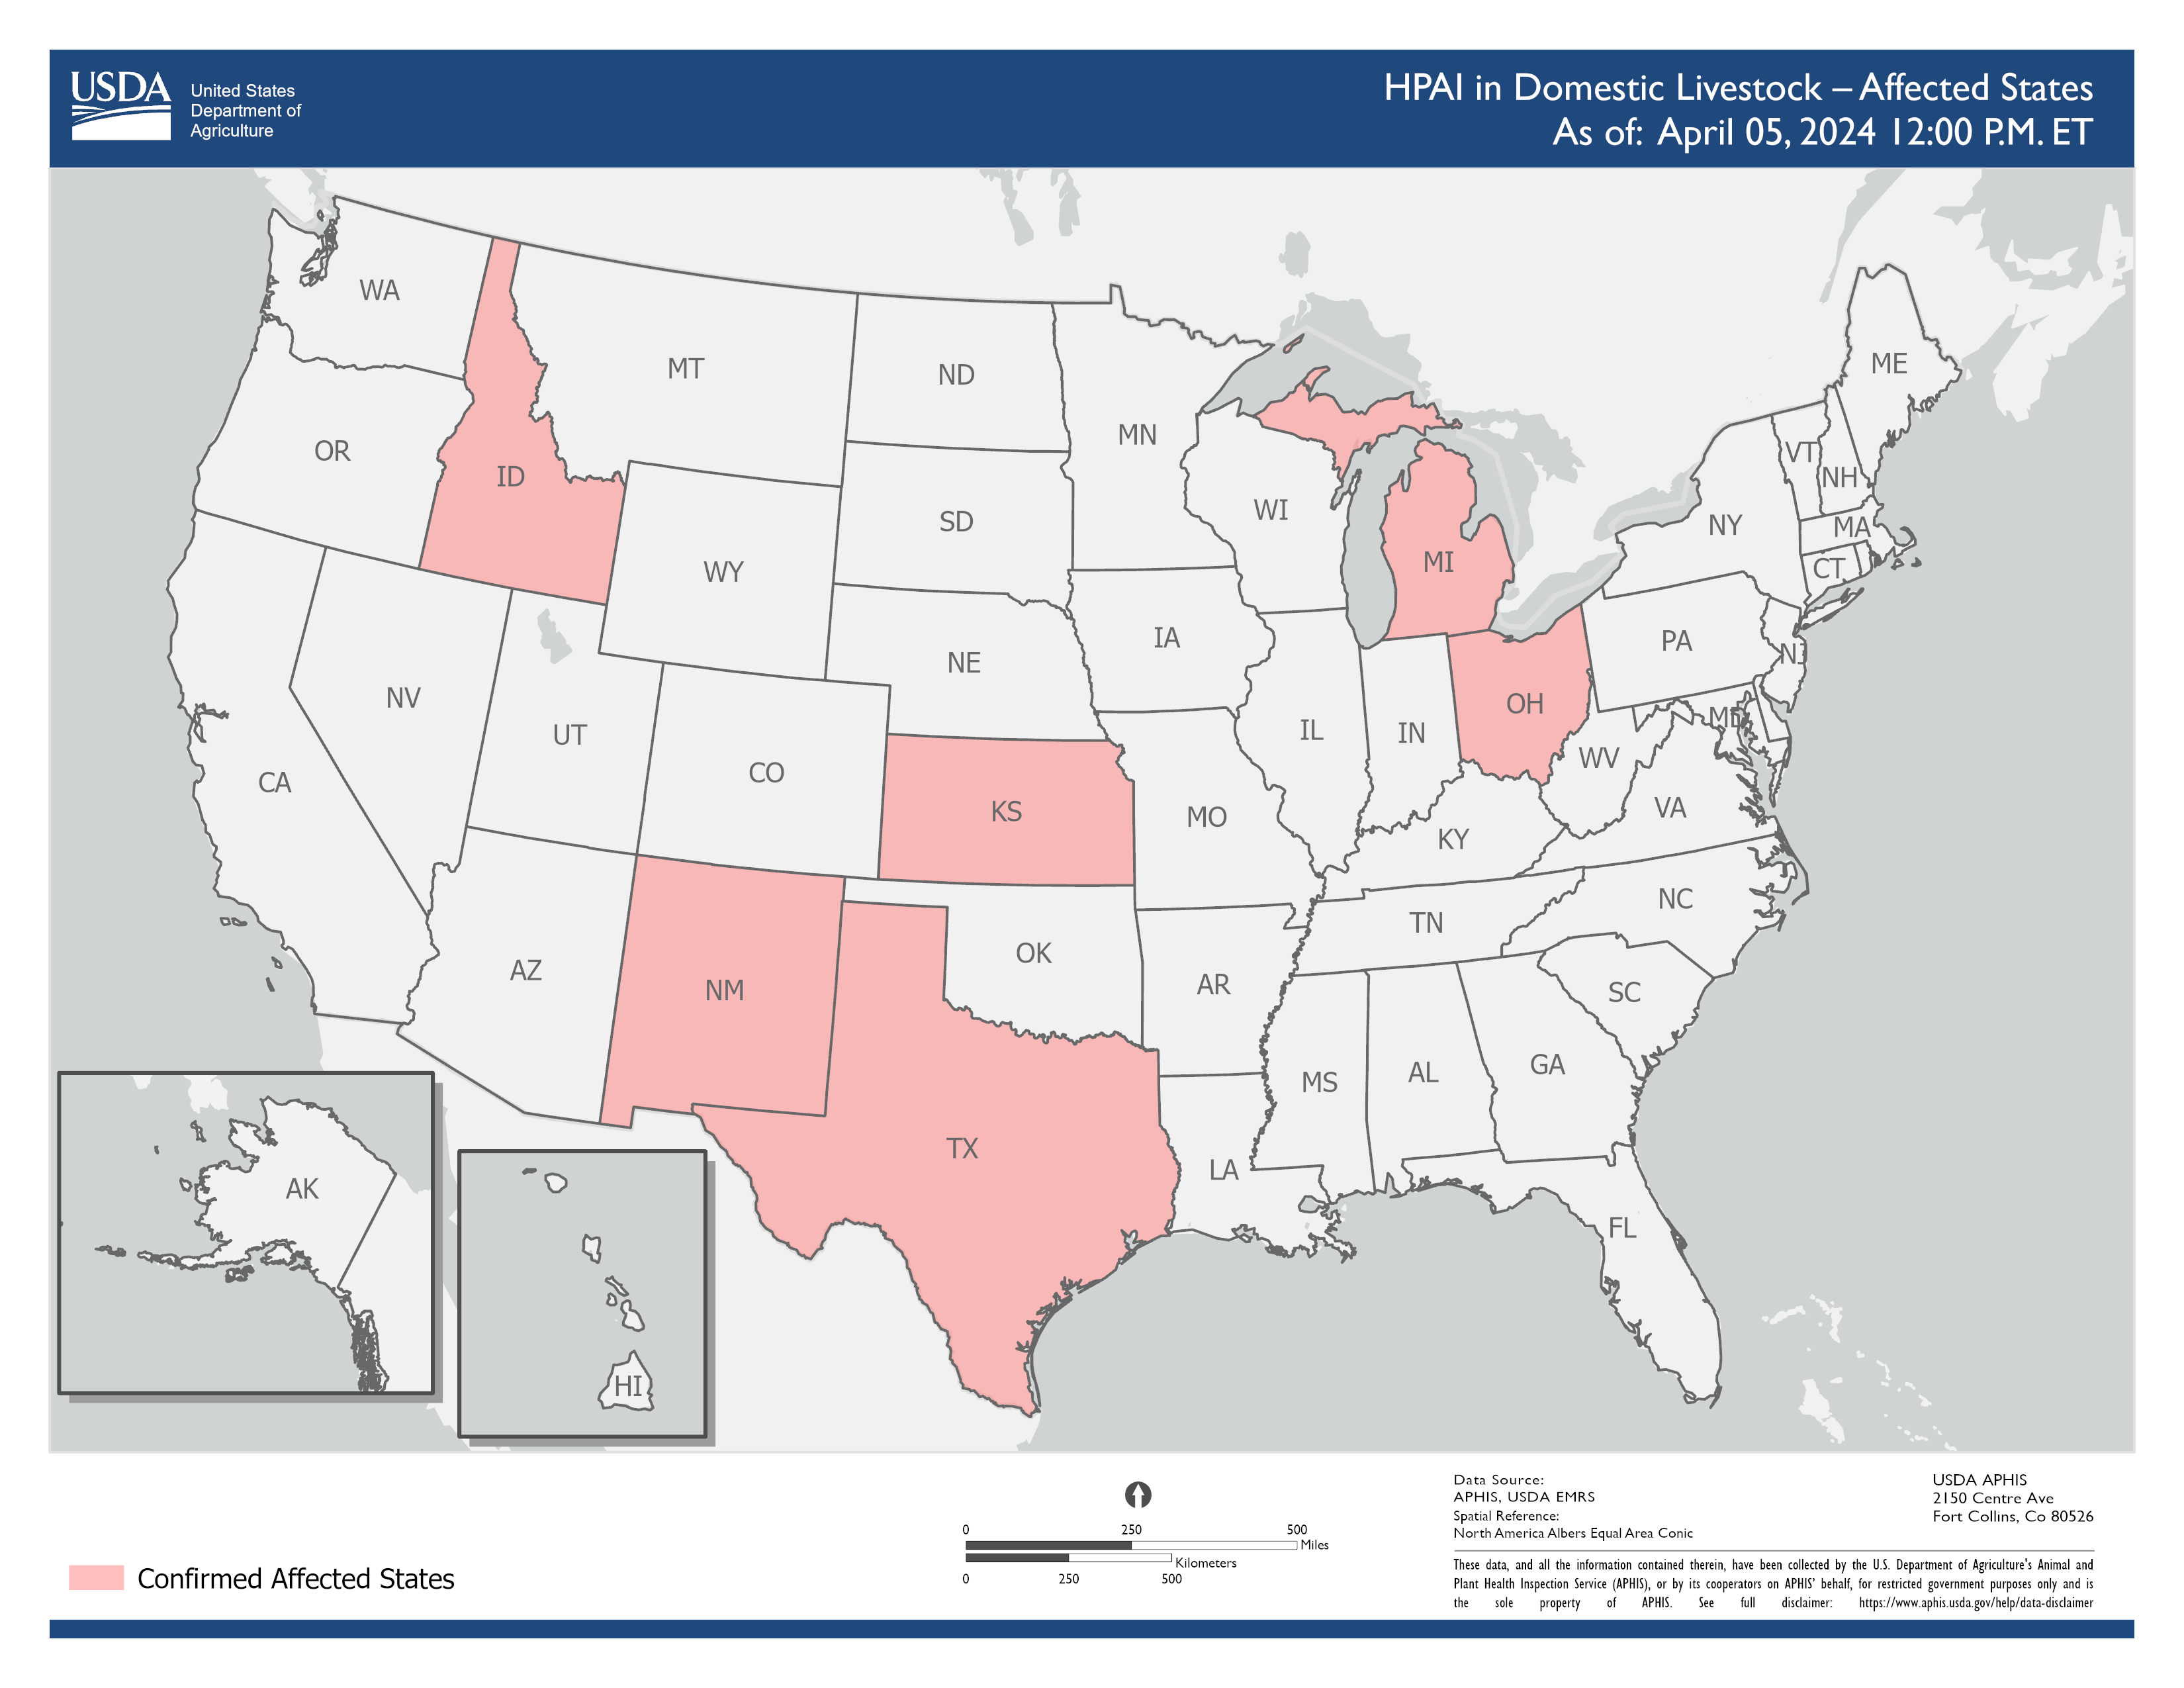 U.S. map showing states where HPAI has been detected in livestock